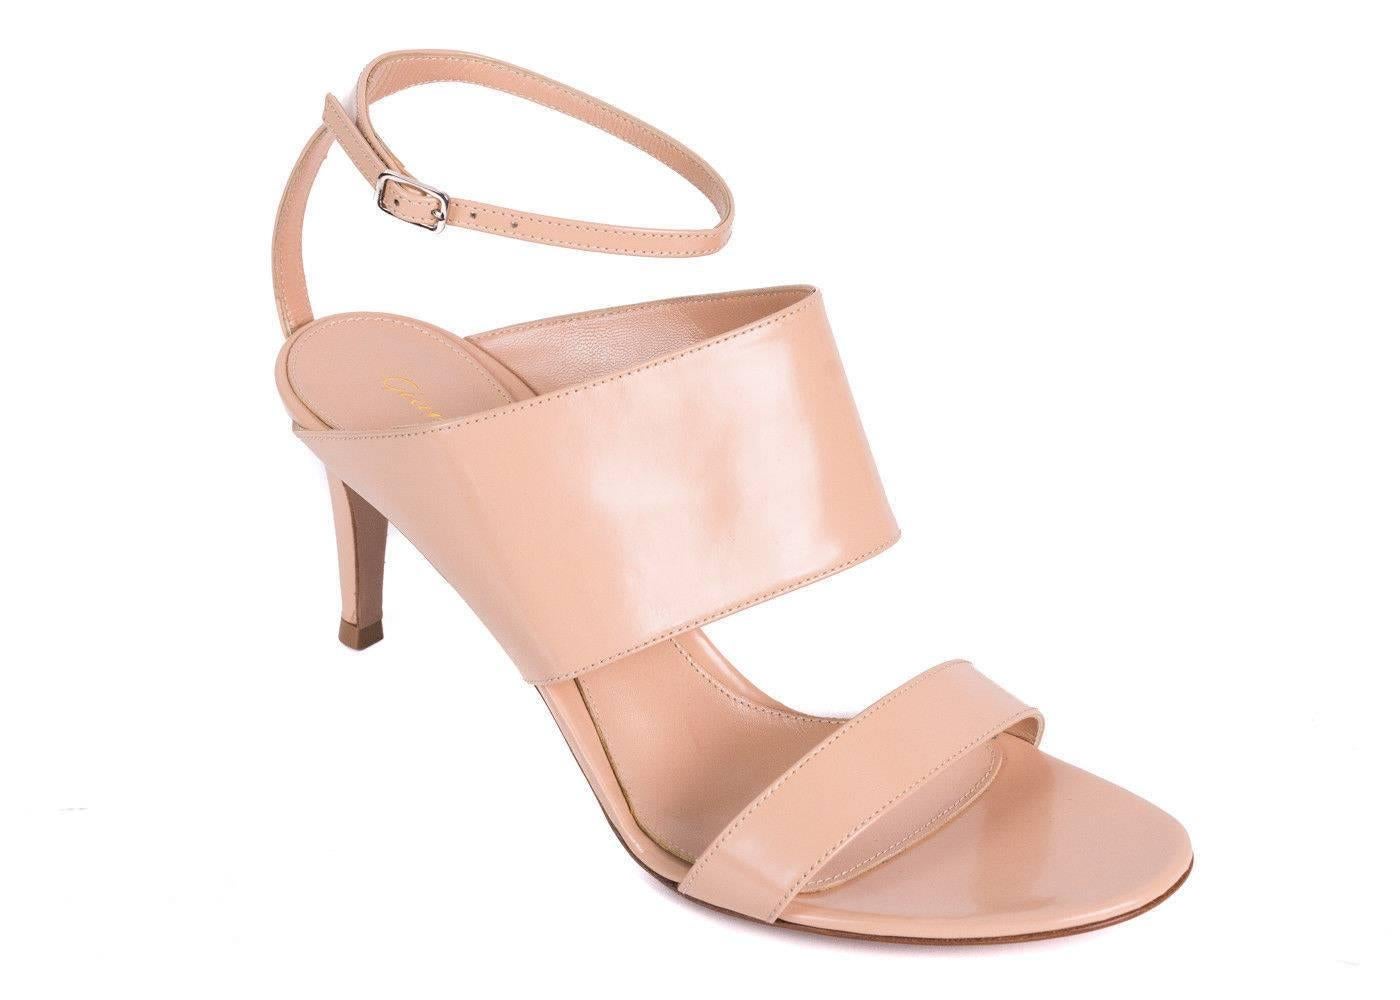 Gianvito Rossi's Nude Mules are the Spring/Summer necessity. This polished leather heels features a fine buckled ankle strap, 2.75